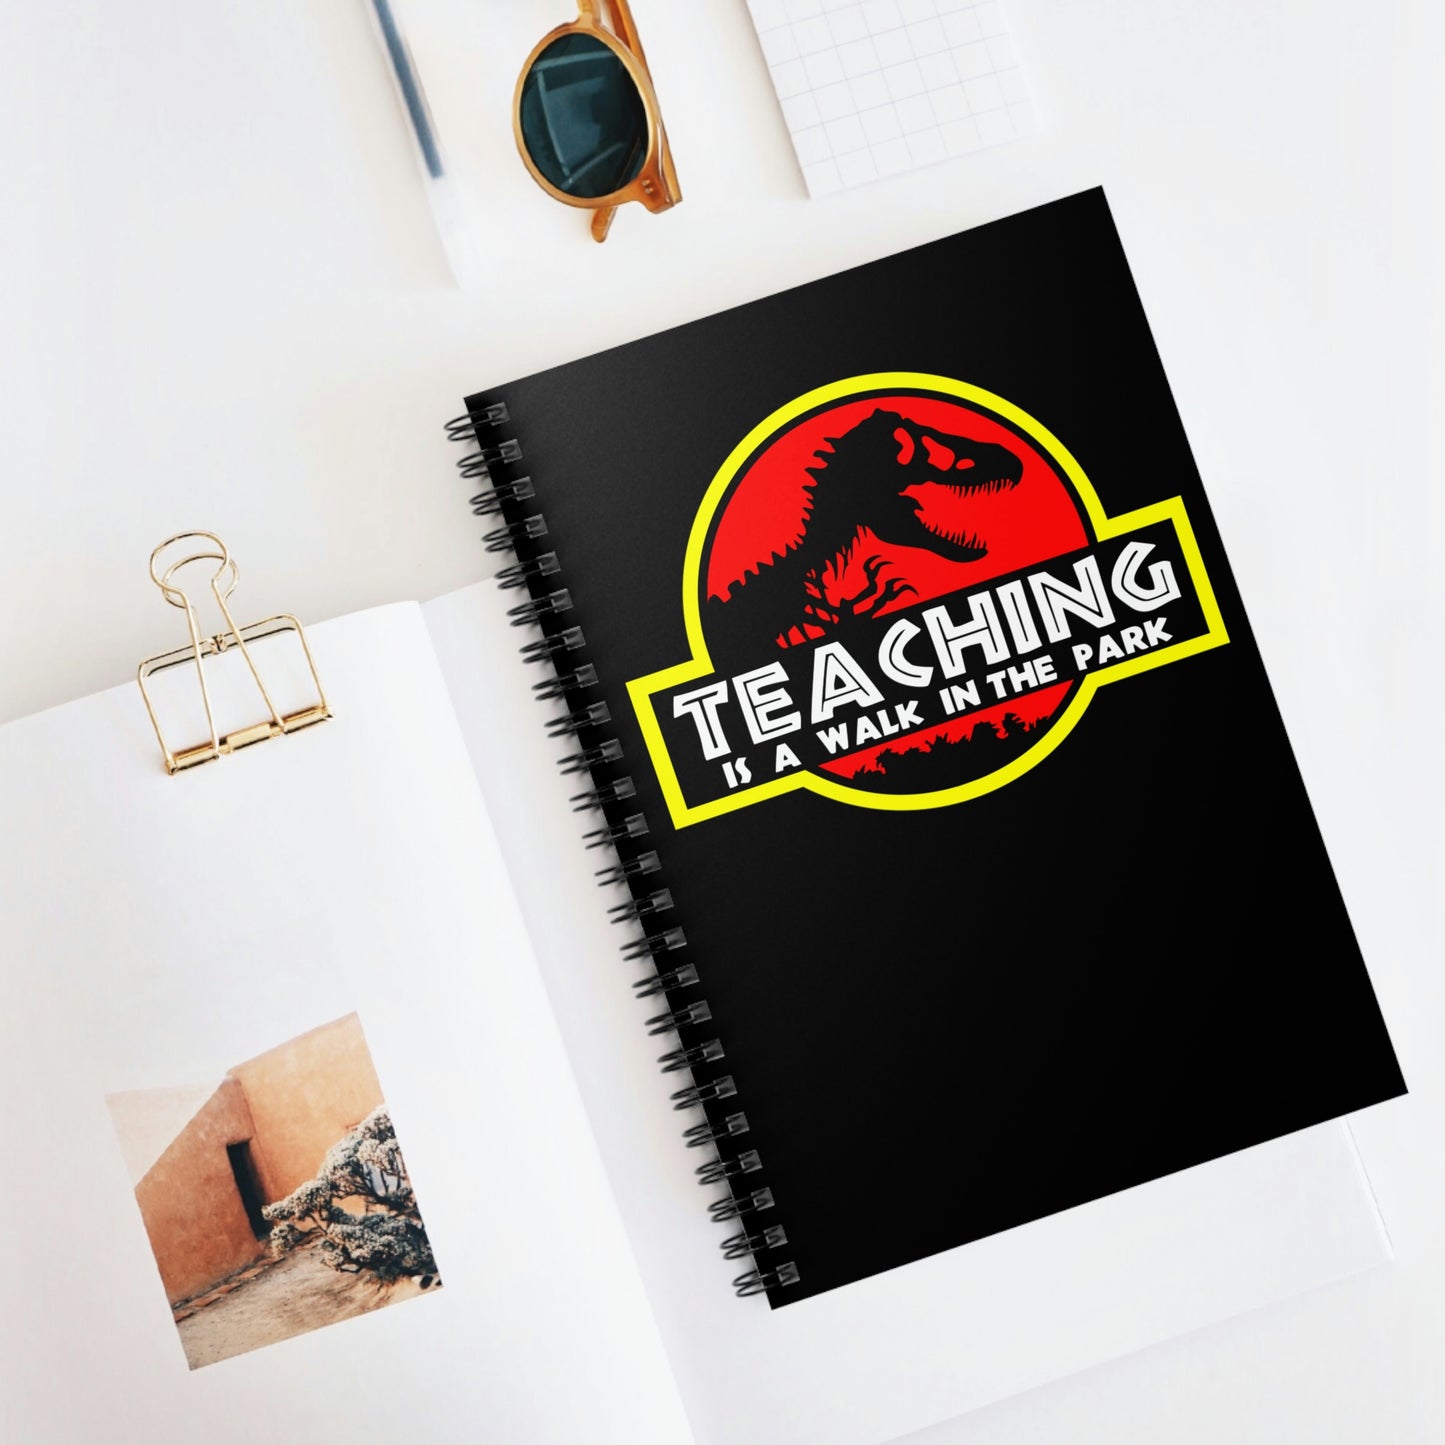 Educator Items (Teaching Is A Walk In The Park/ Spiral Notebook - Ruled Line)